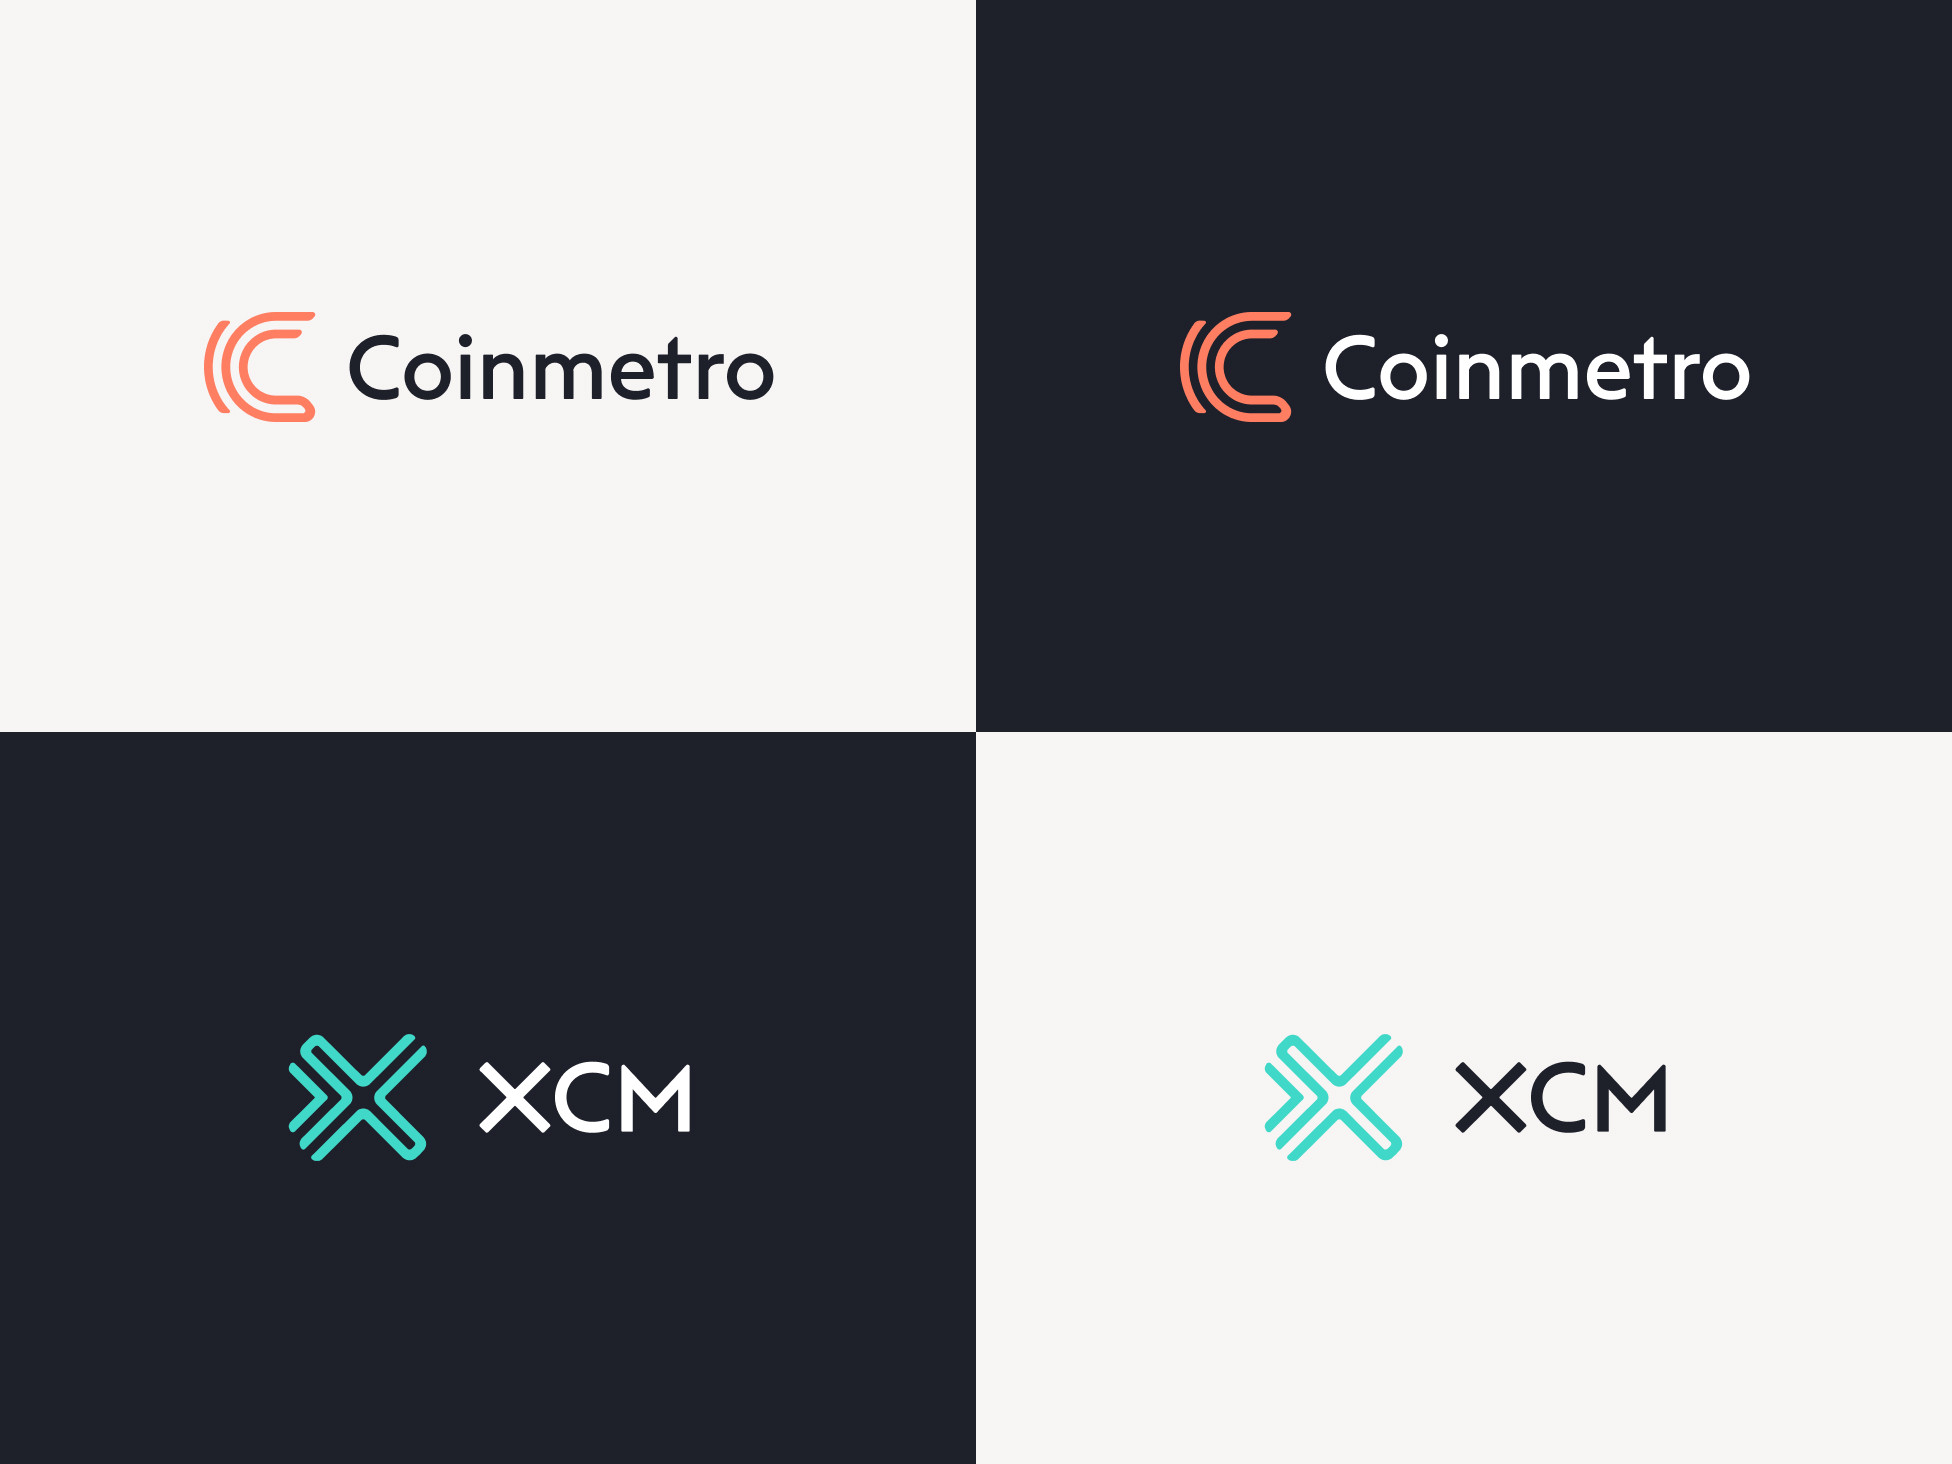 Coinmetro and XCM logos by DUX agency